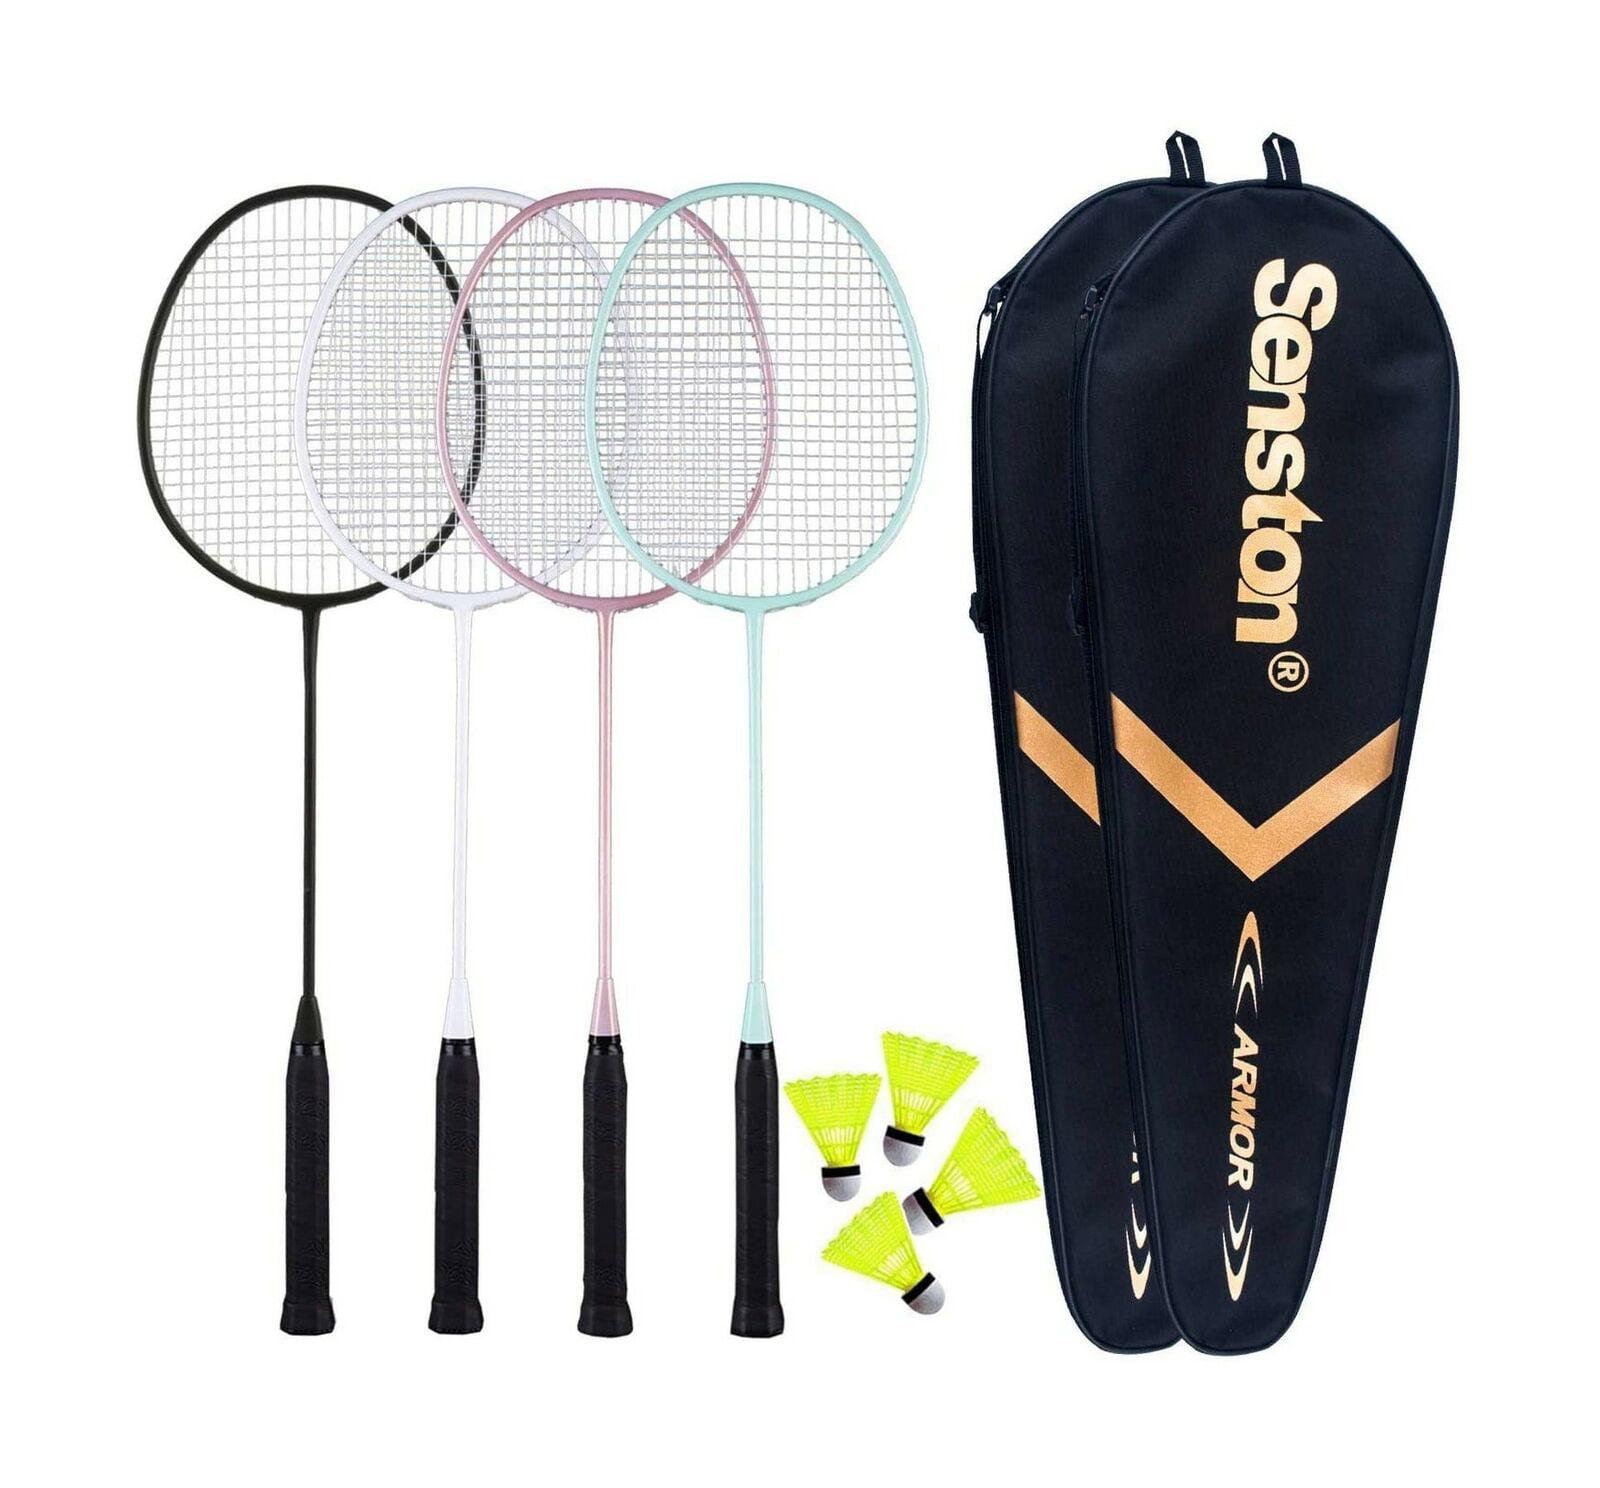 Complete Badminton Set with Net for Starter, Details about    Badminton Rackets Set of 4 